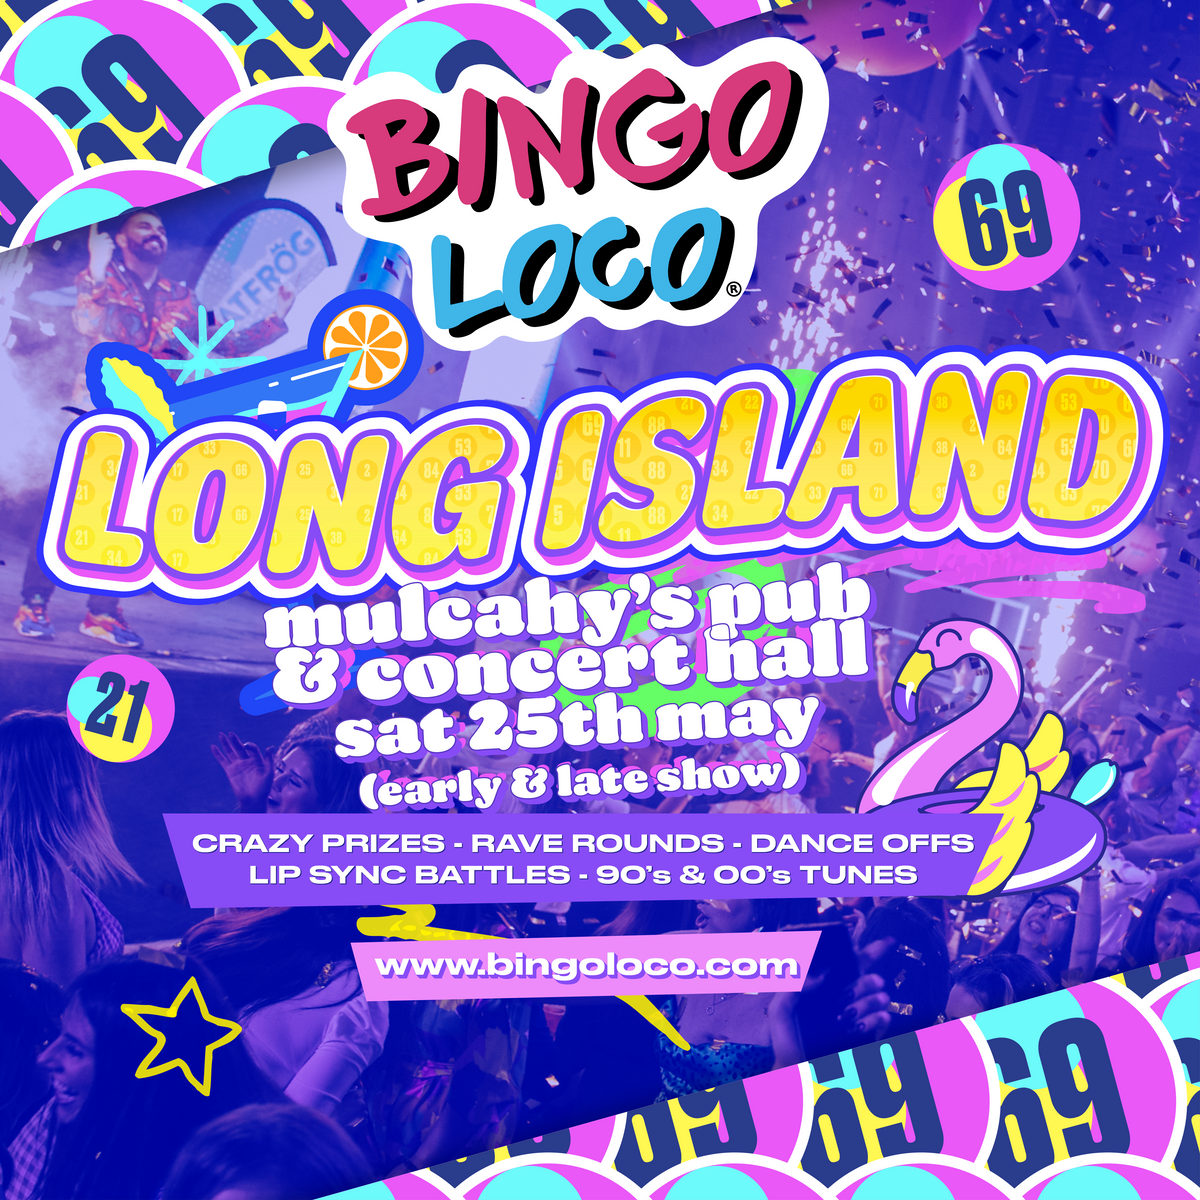 Long Island 25th may_Square Format.png